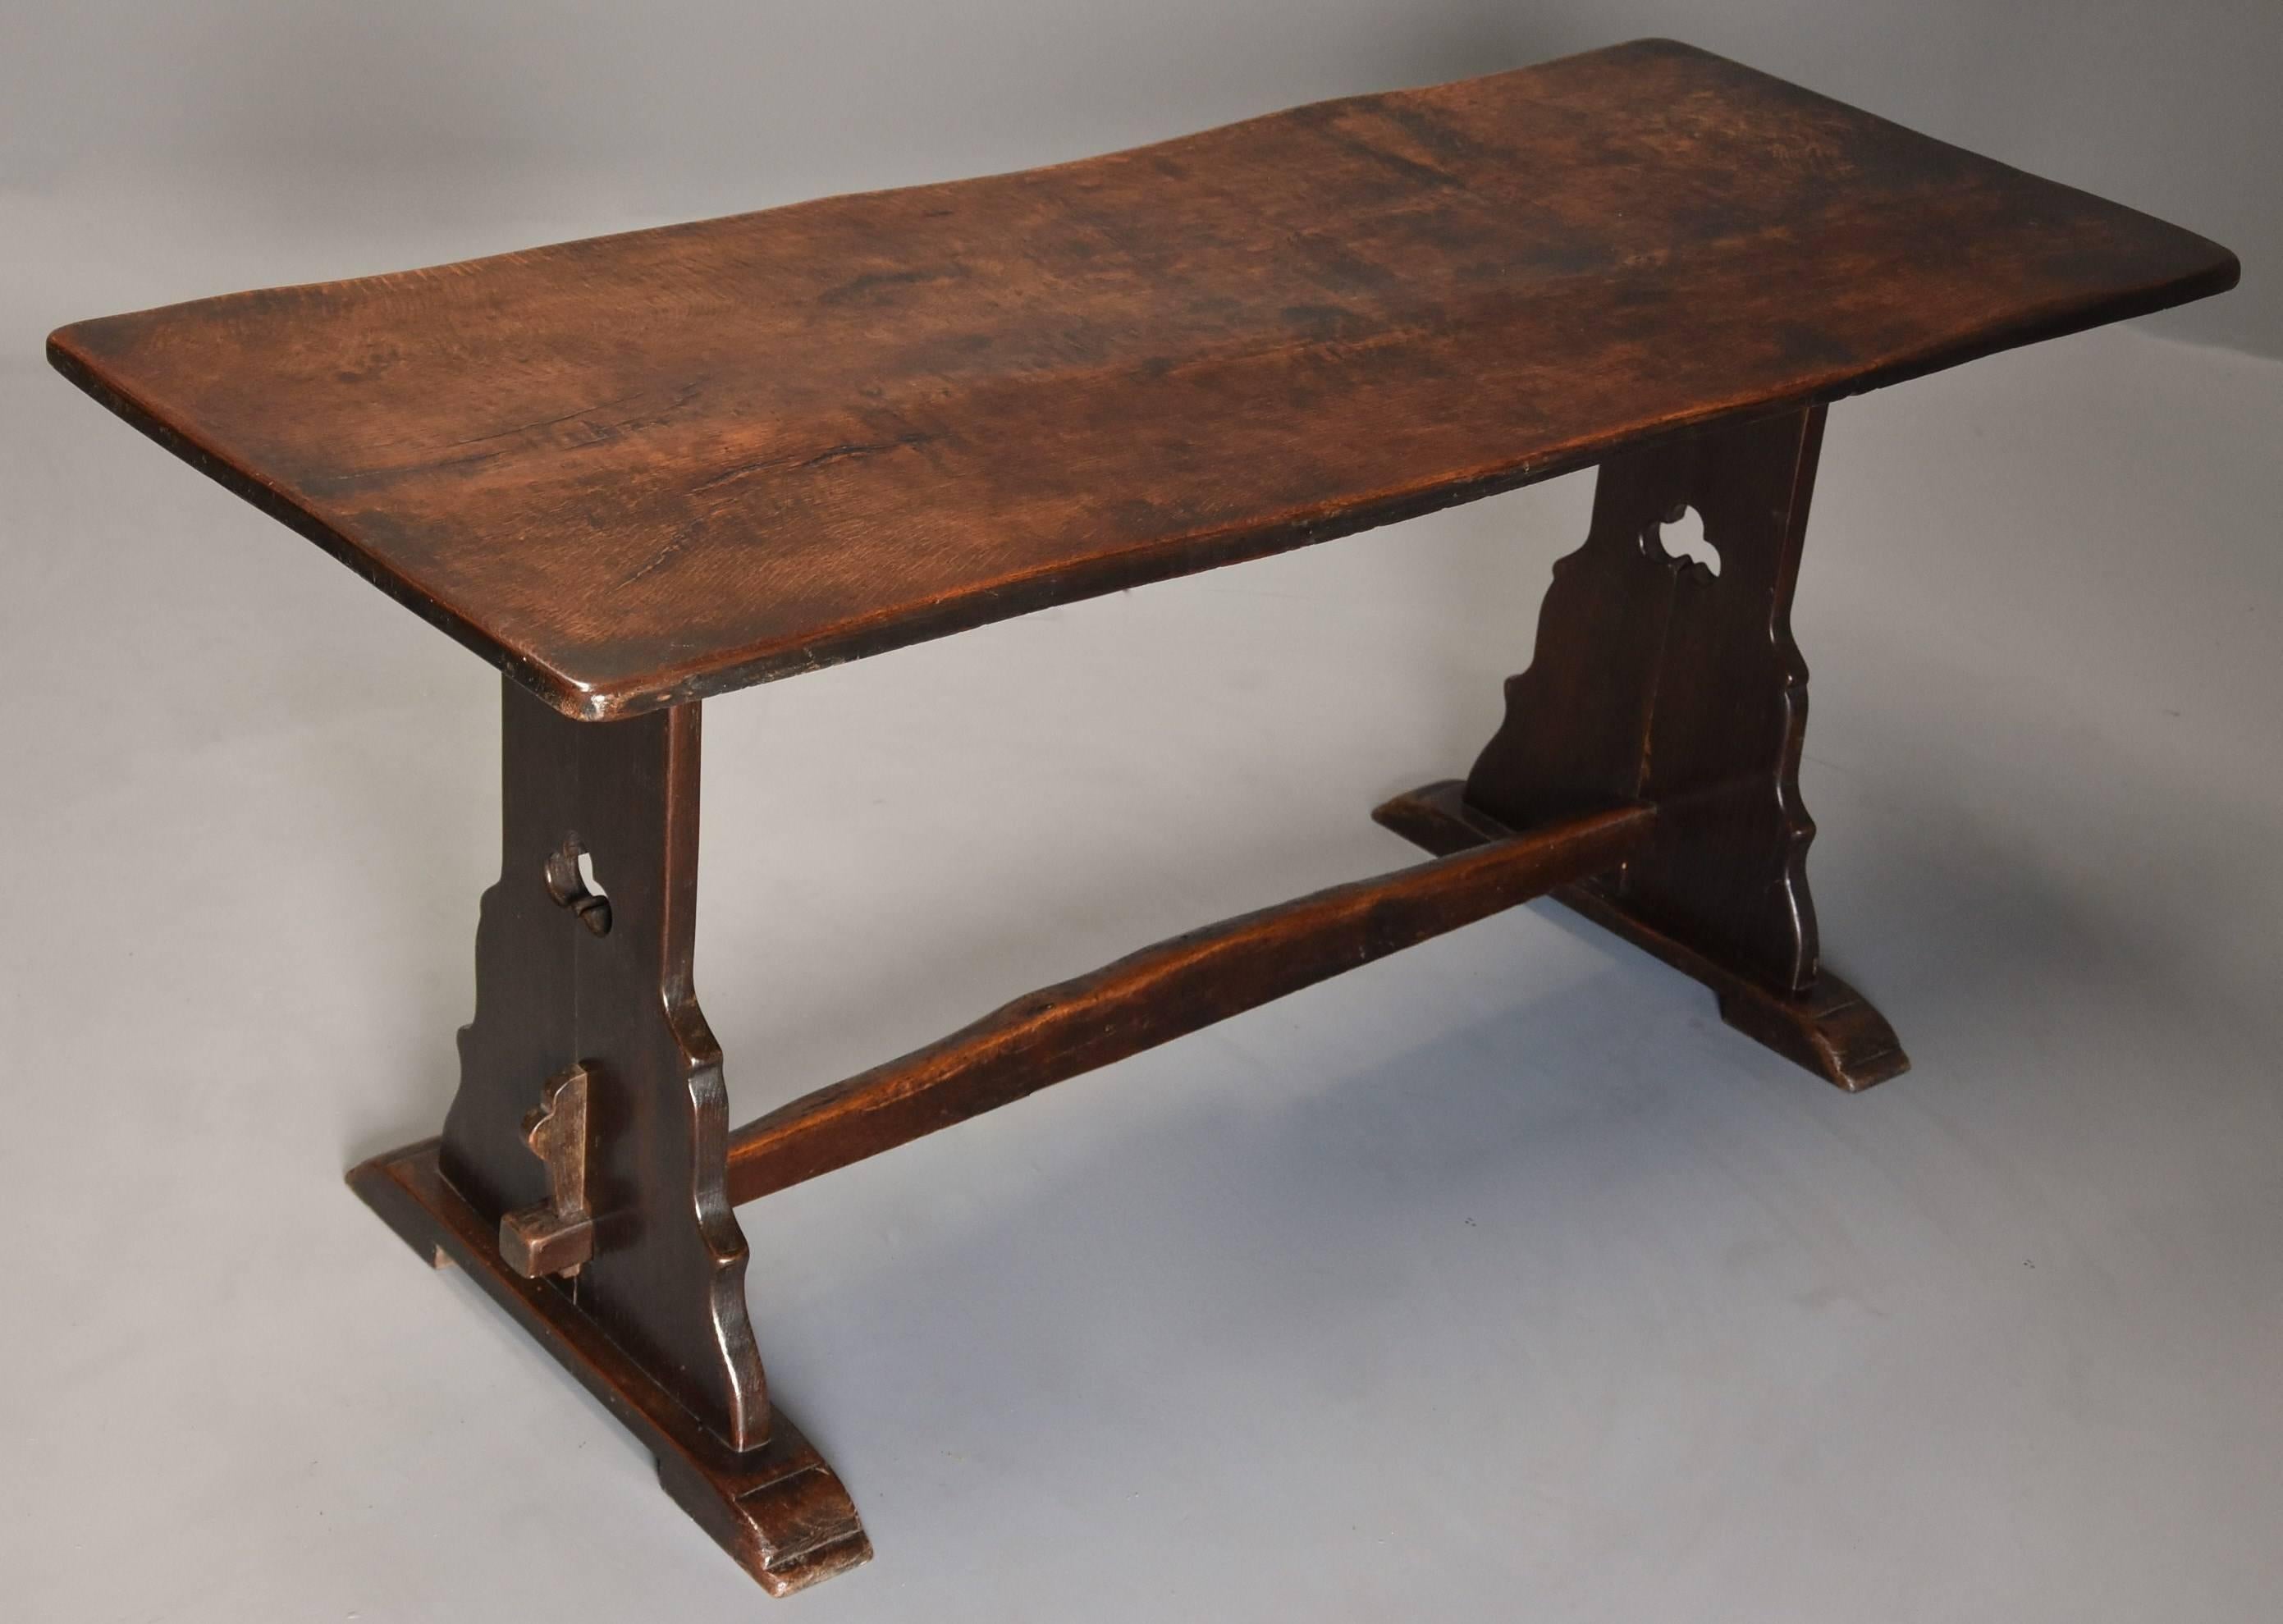 Arts and Crafts Early 20th Century Arts & Crafts Oak Pegged Trestle Table with Superb Patina